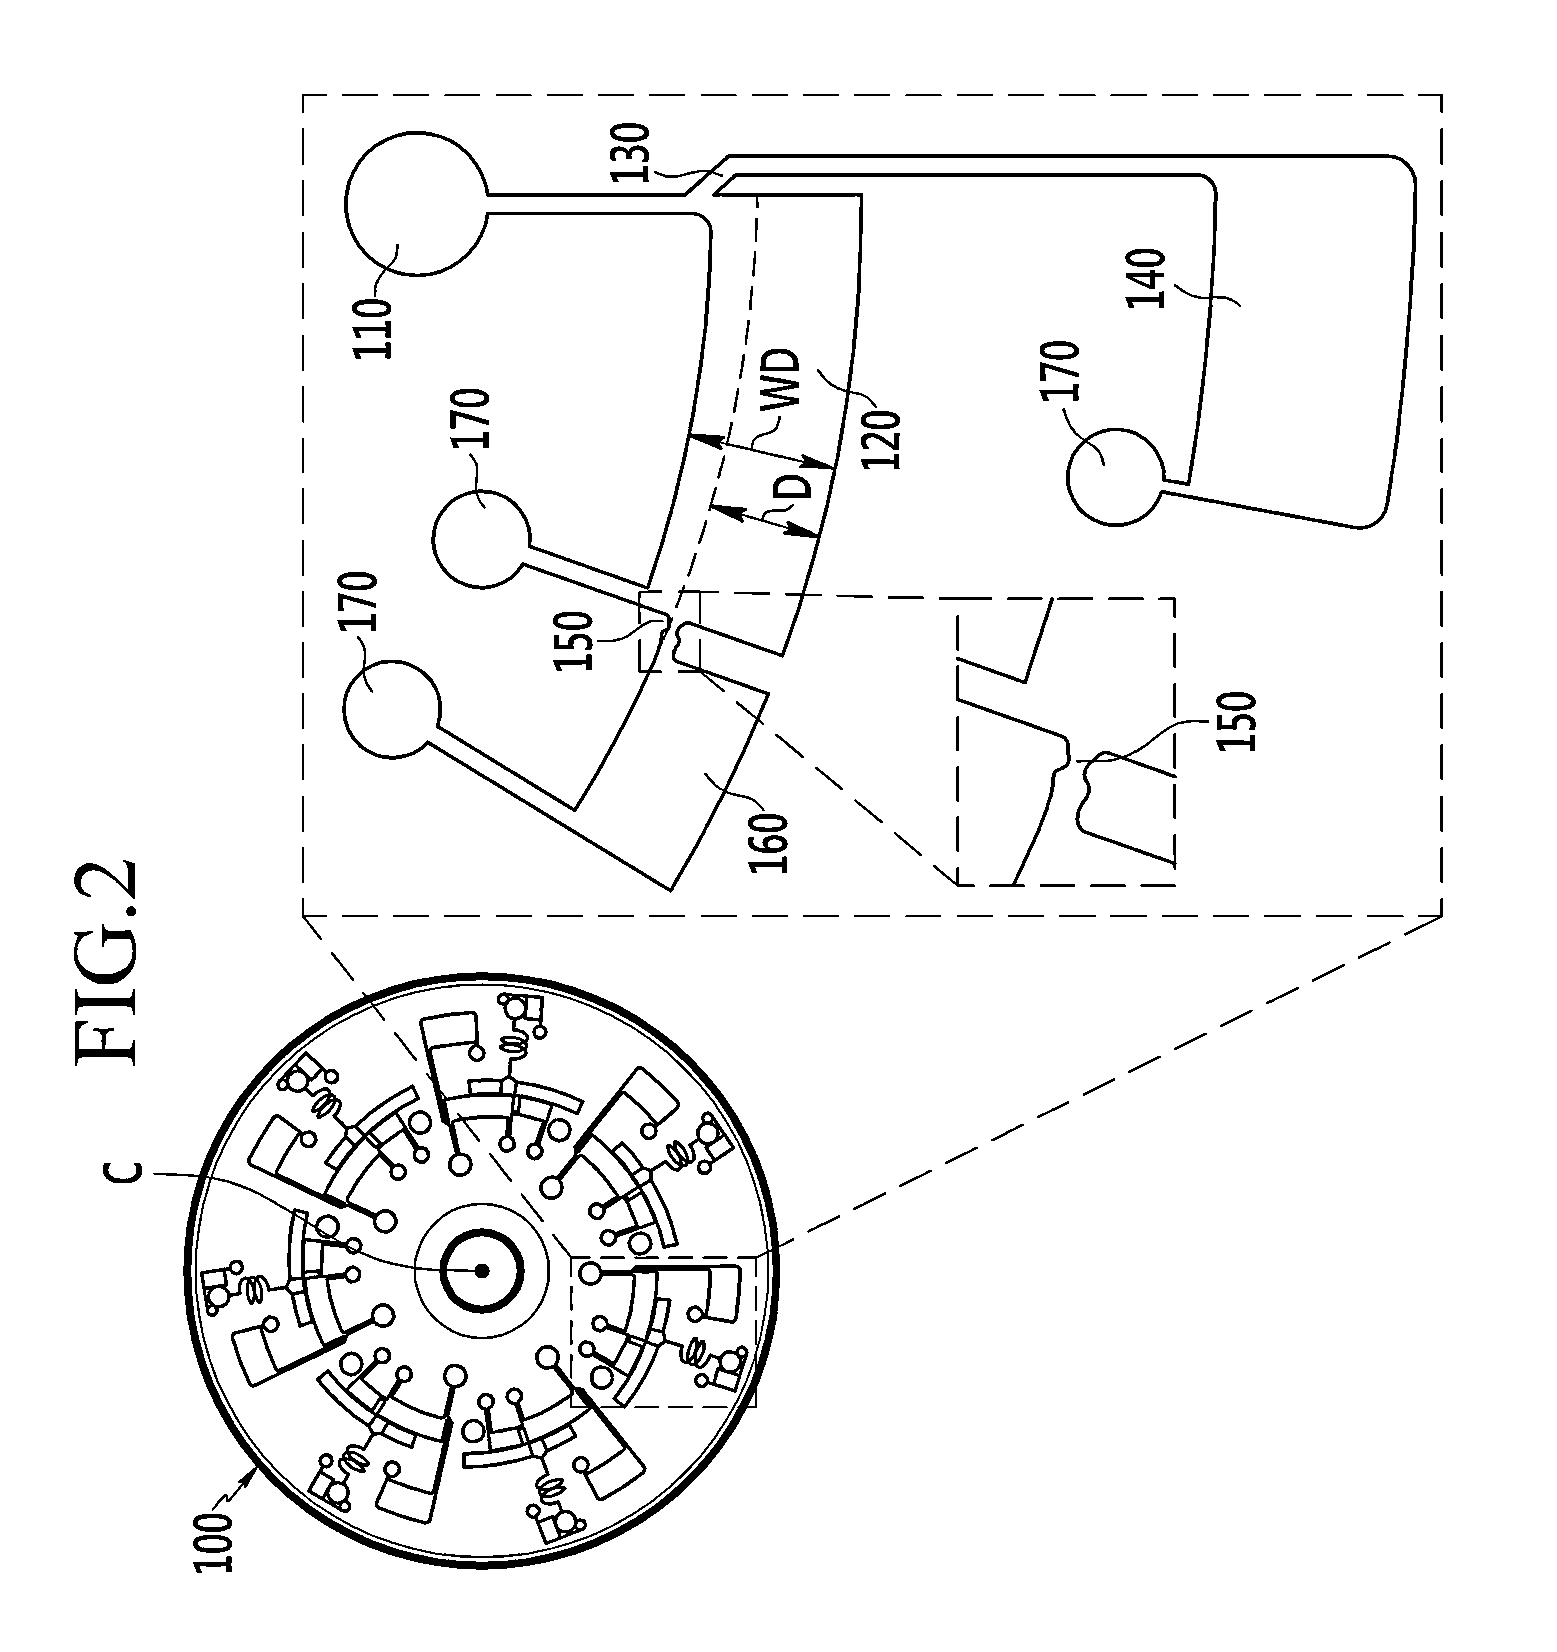 Disk-type microfluid system and method for checking blood status